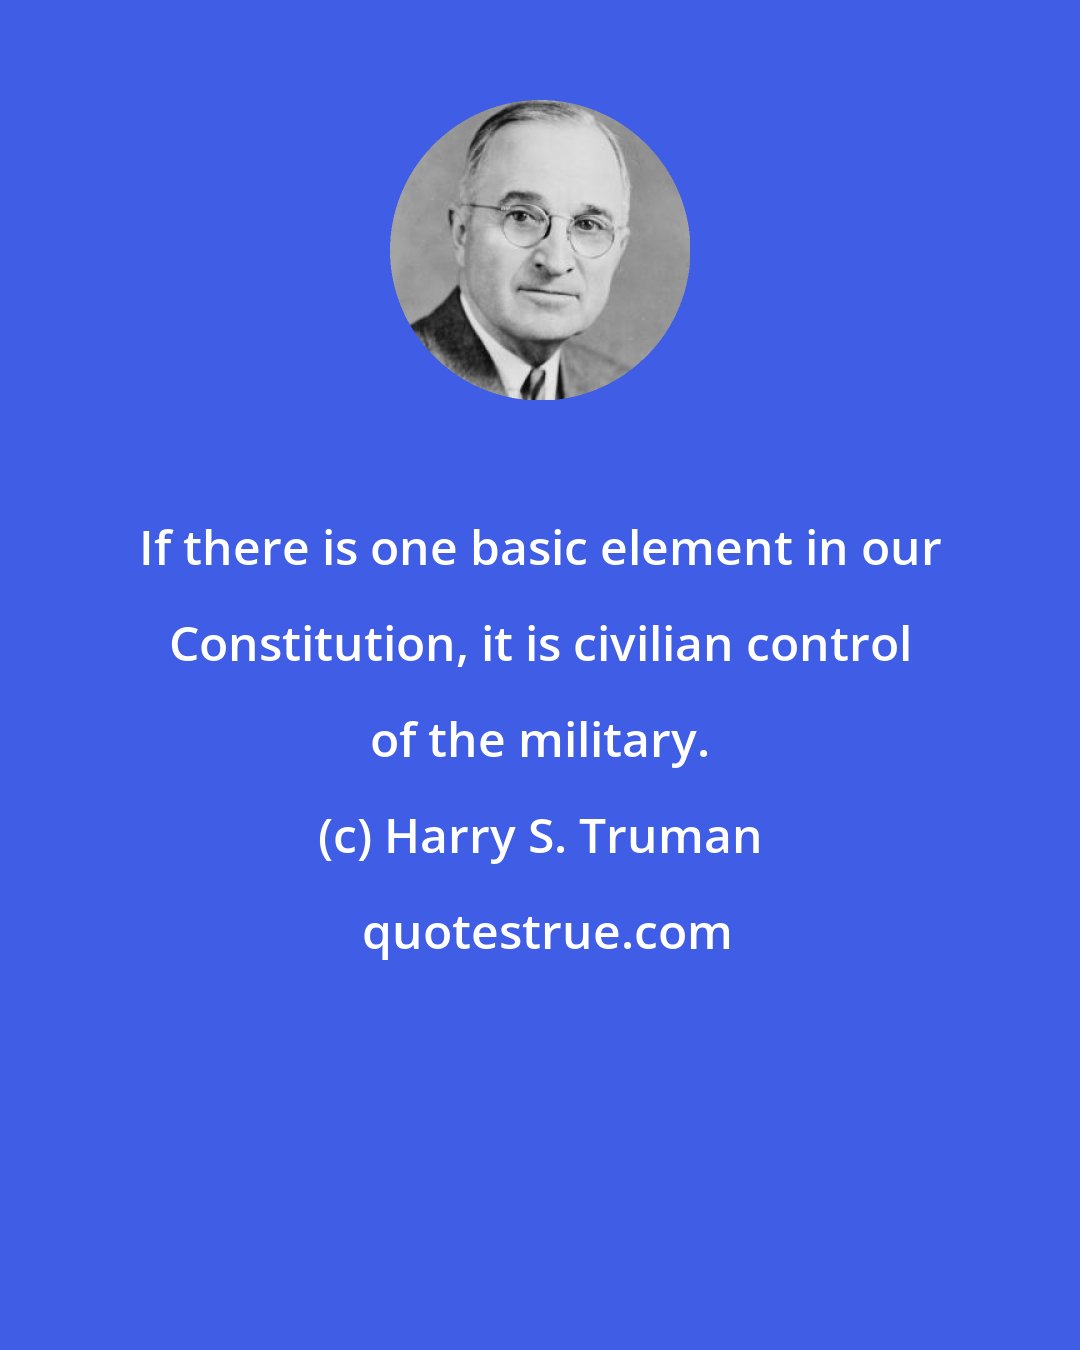 Harry S. Truman: If there is one basic element in our Constitution, it is civilian control of the military.